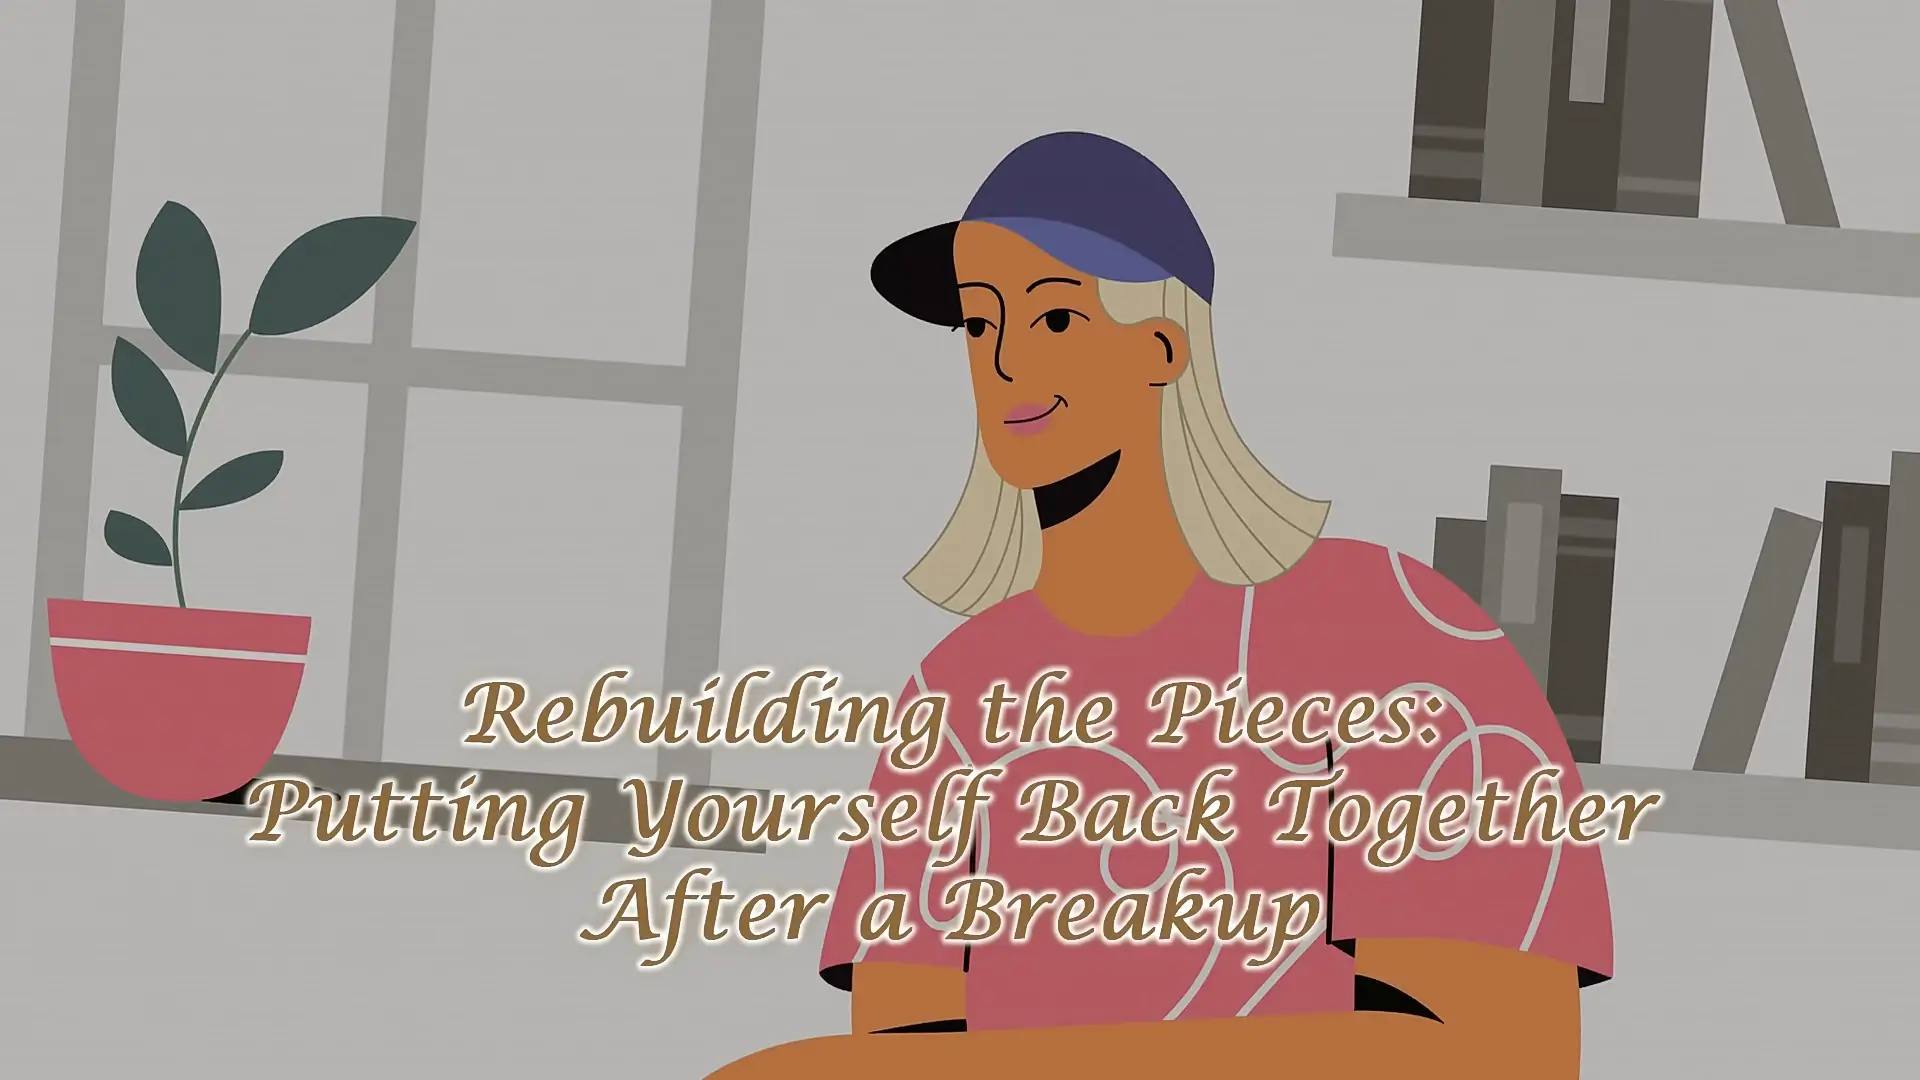 Rebuilding the Pieces: Putting Yourself Back Together After a Breakup